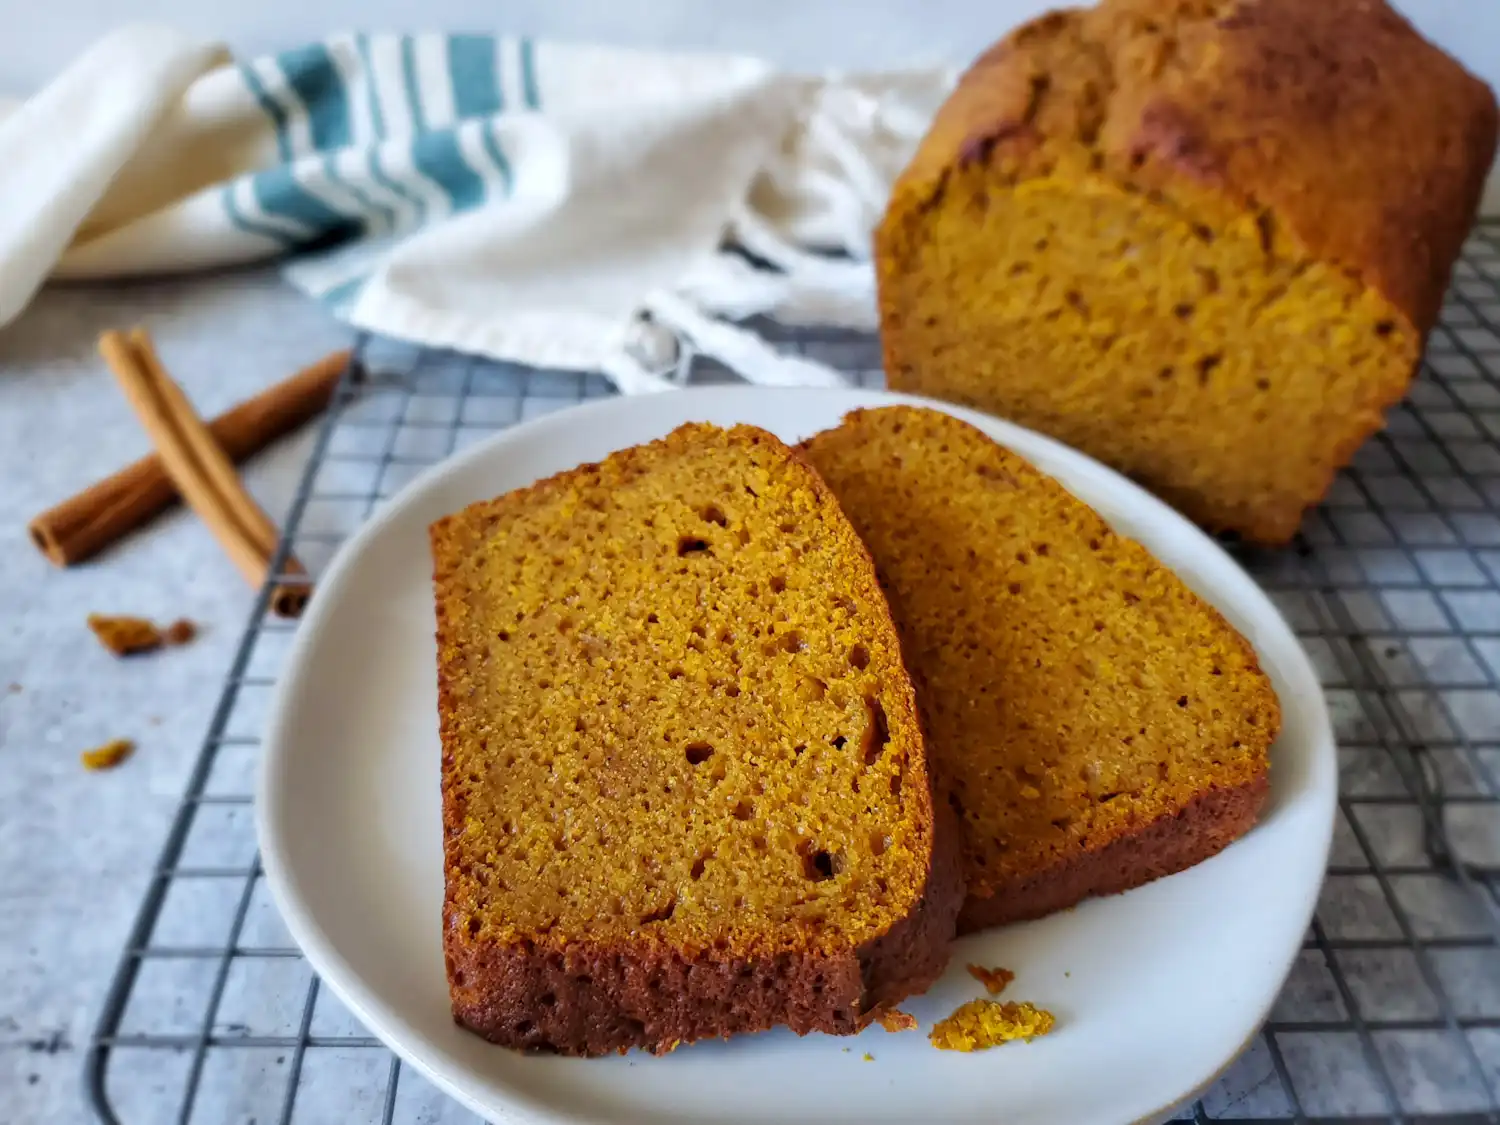 Two thick slices of sweet bread on a small plate. The bread is slightly orange and brown in color, sourdough pumpkin spice bread. The plate is resting on a cooling rack, and the cut loaf of pumpkin bread is blurry in the background with crumbs scattered around. 